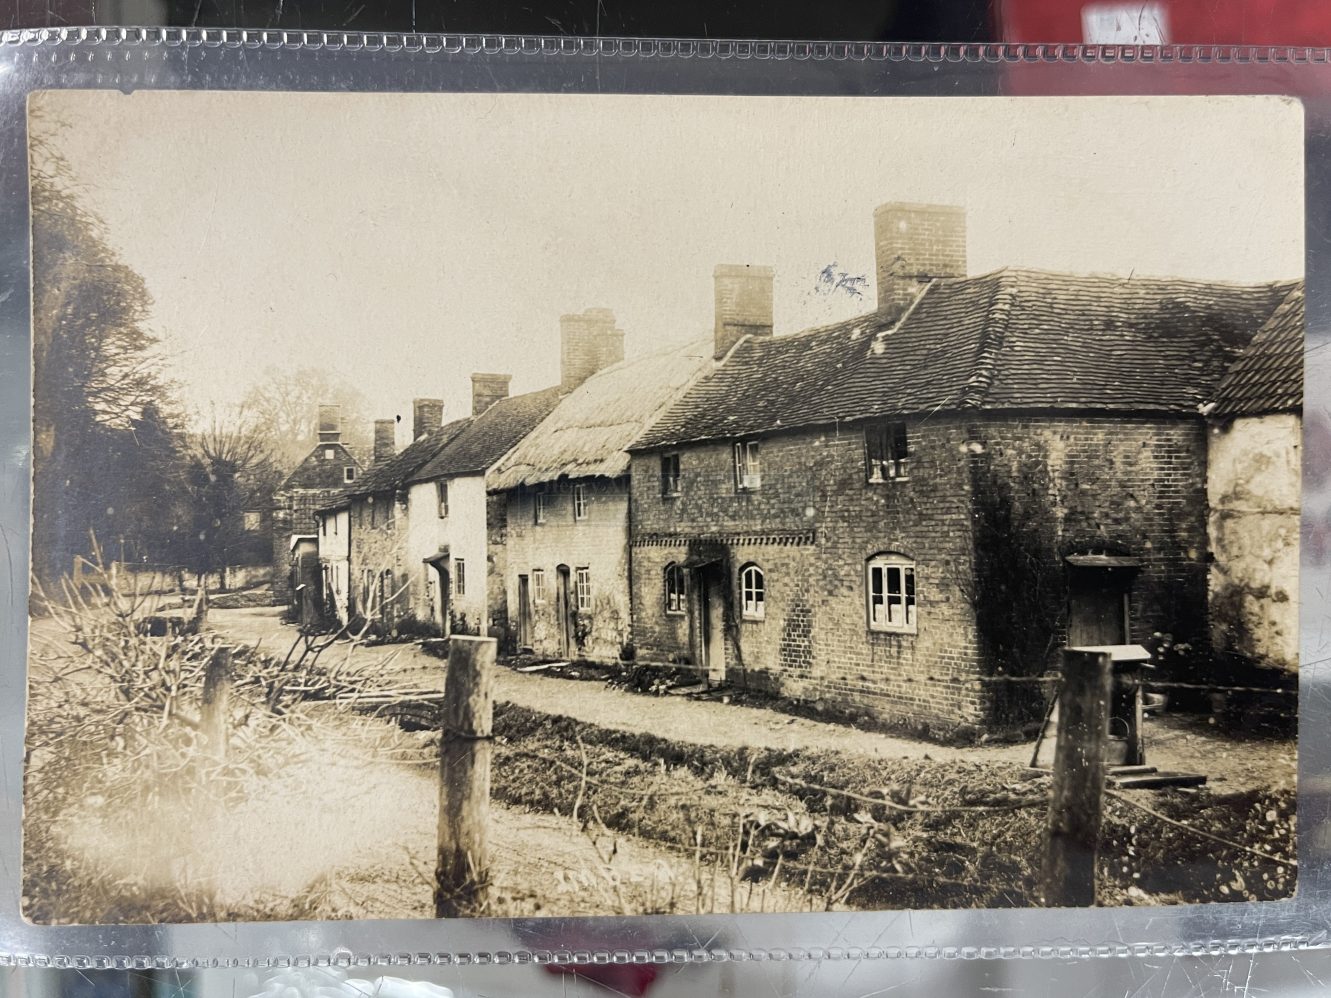 Postcards: Real photo postcards of the abandoned Wiltshire Village of Imber. (3)